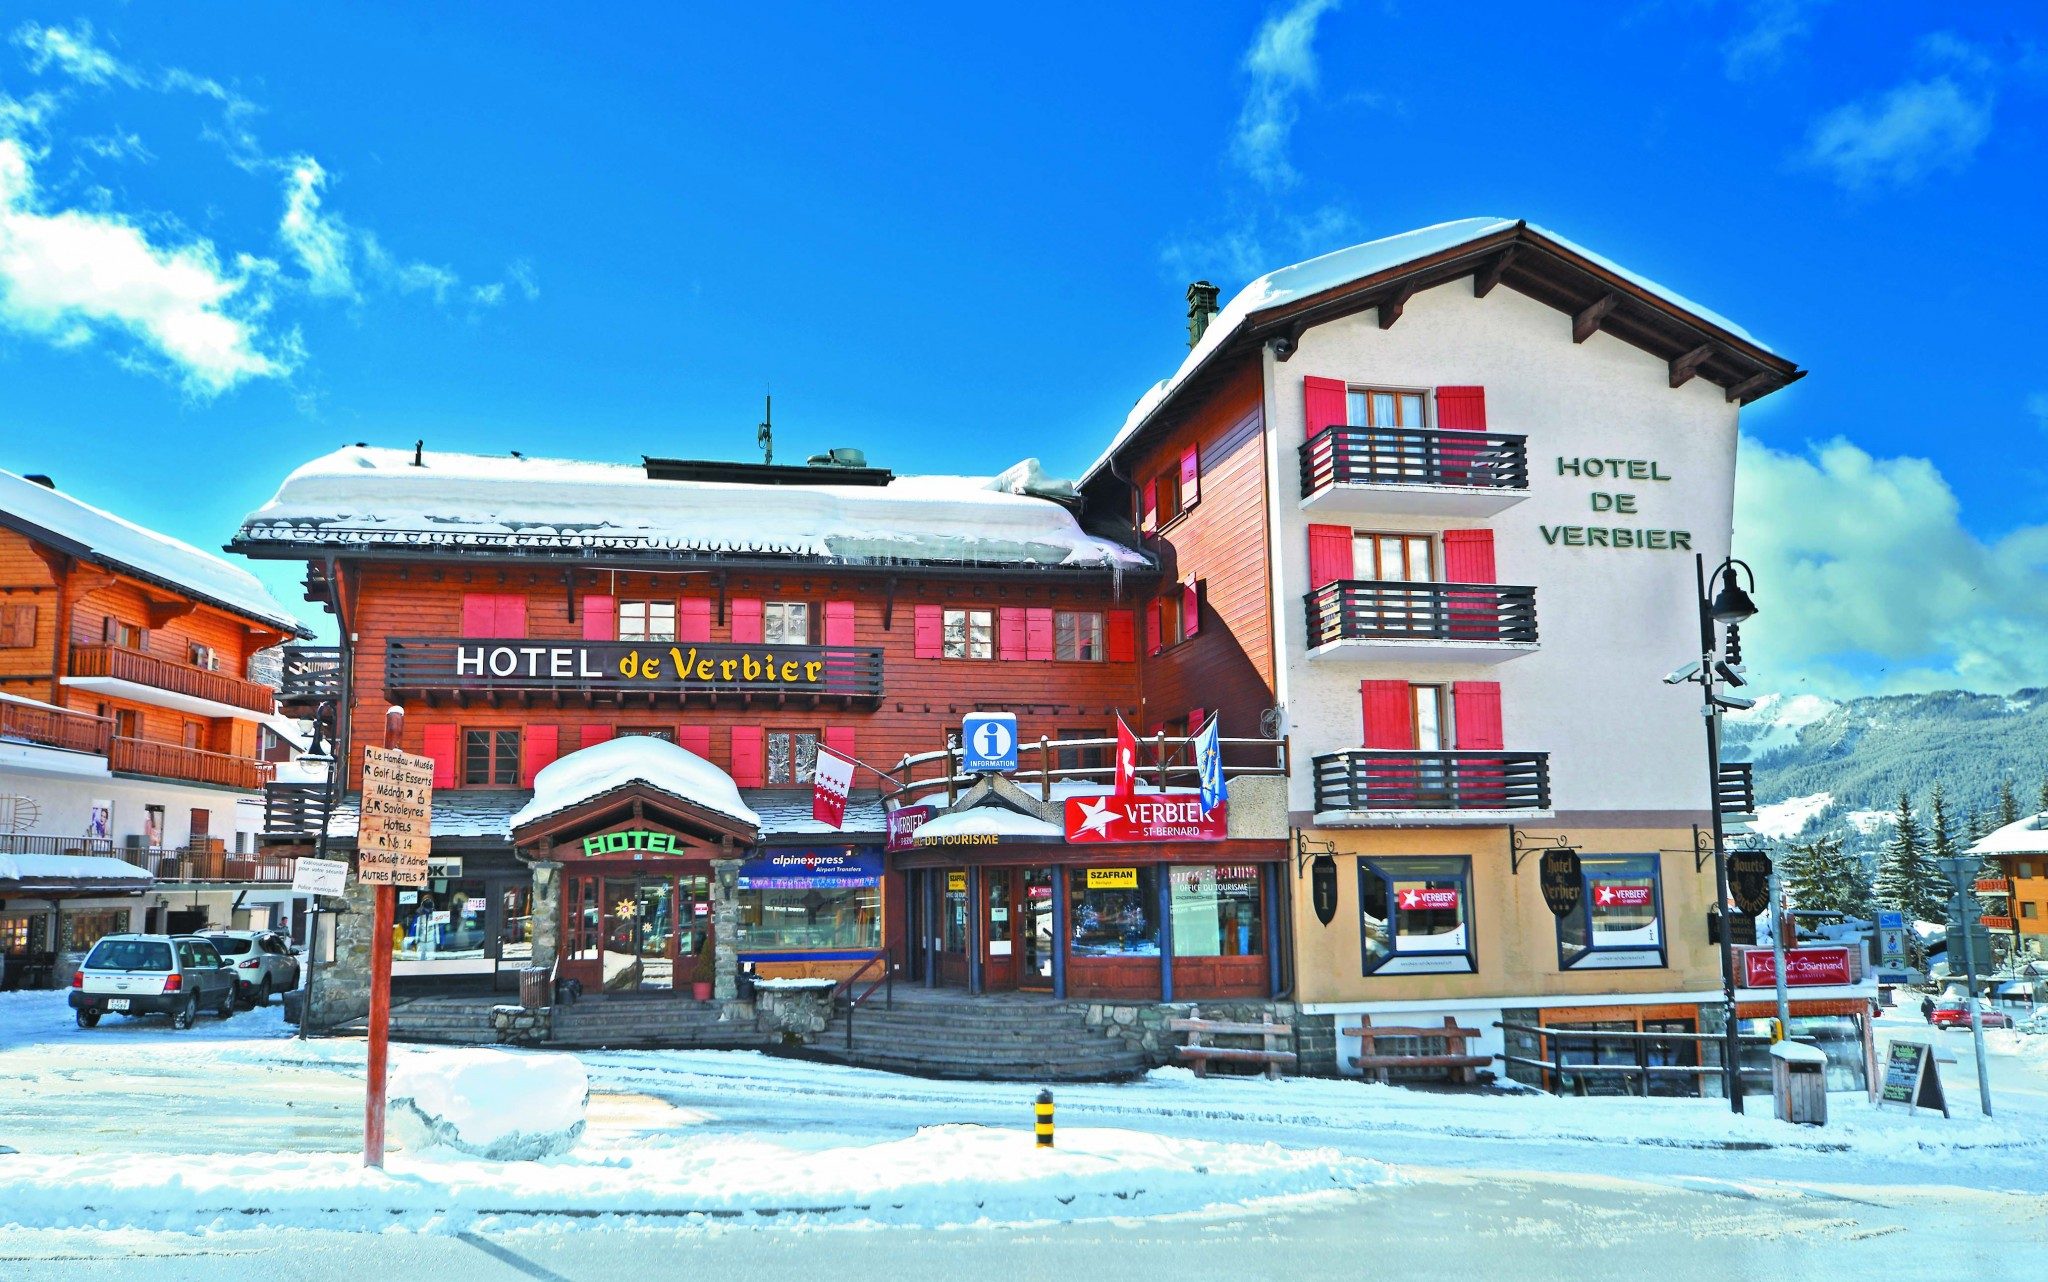 Booking A Trip To Verbier? Talk To The Experts!